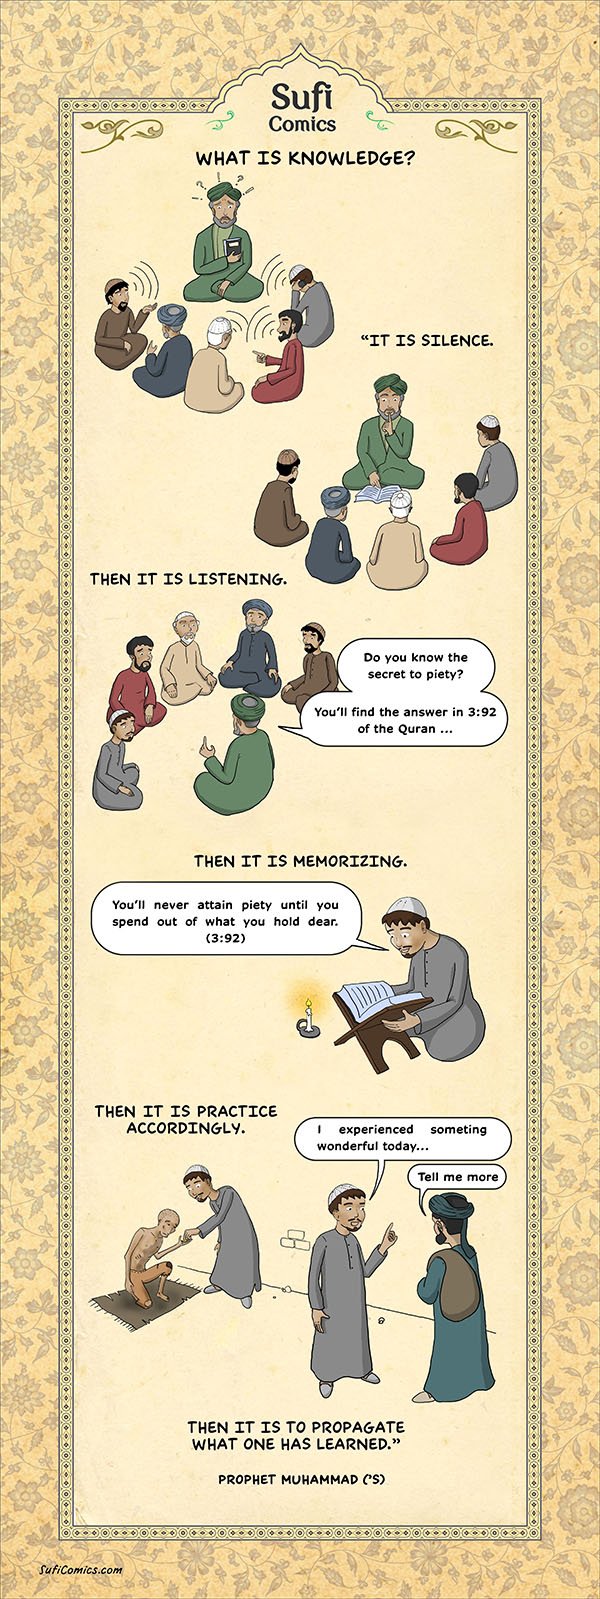 sufi-comics-what-is-knowledge